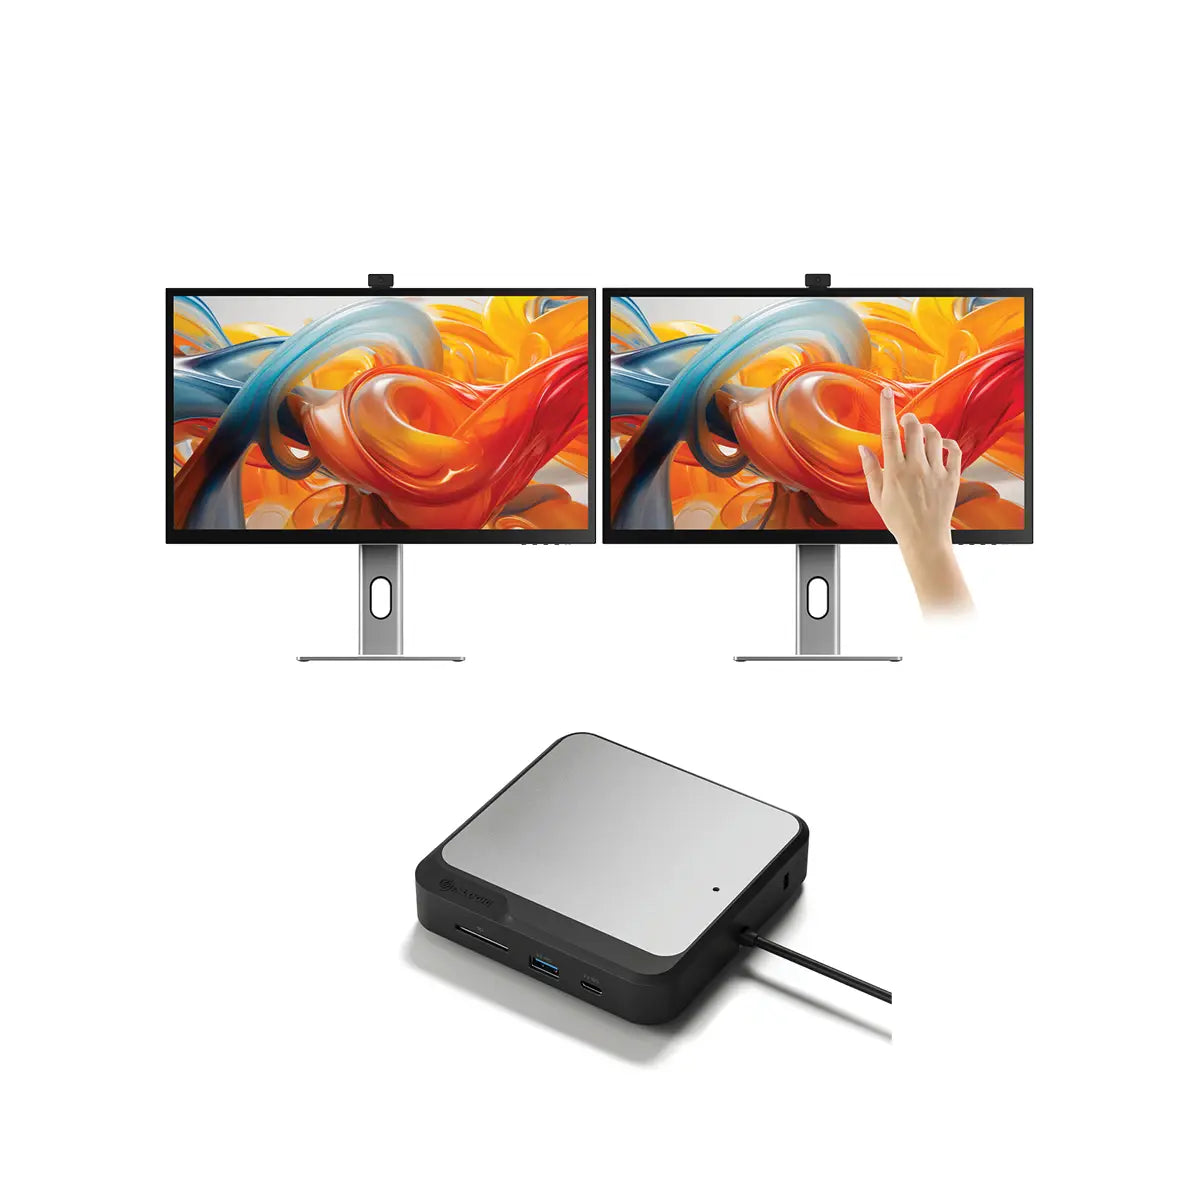 clarity-pro-touch-27-uhd-4k-monitor-with-65w-pd-webcam-and-touchscreen-pack-of-2-dual-4k-universal-docking-station-hdmi-edition1